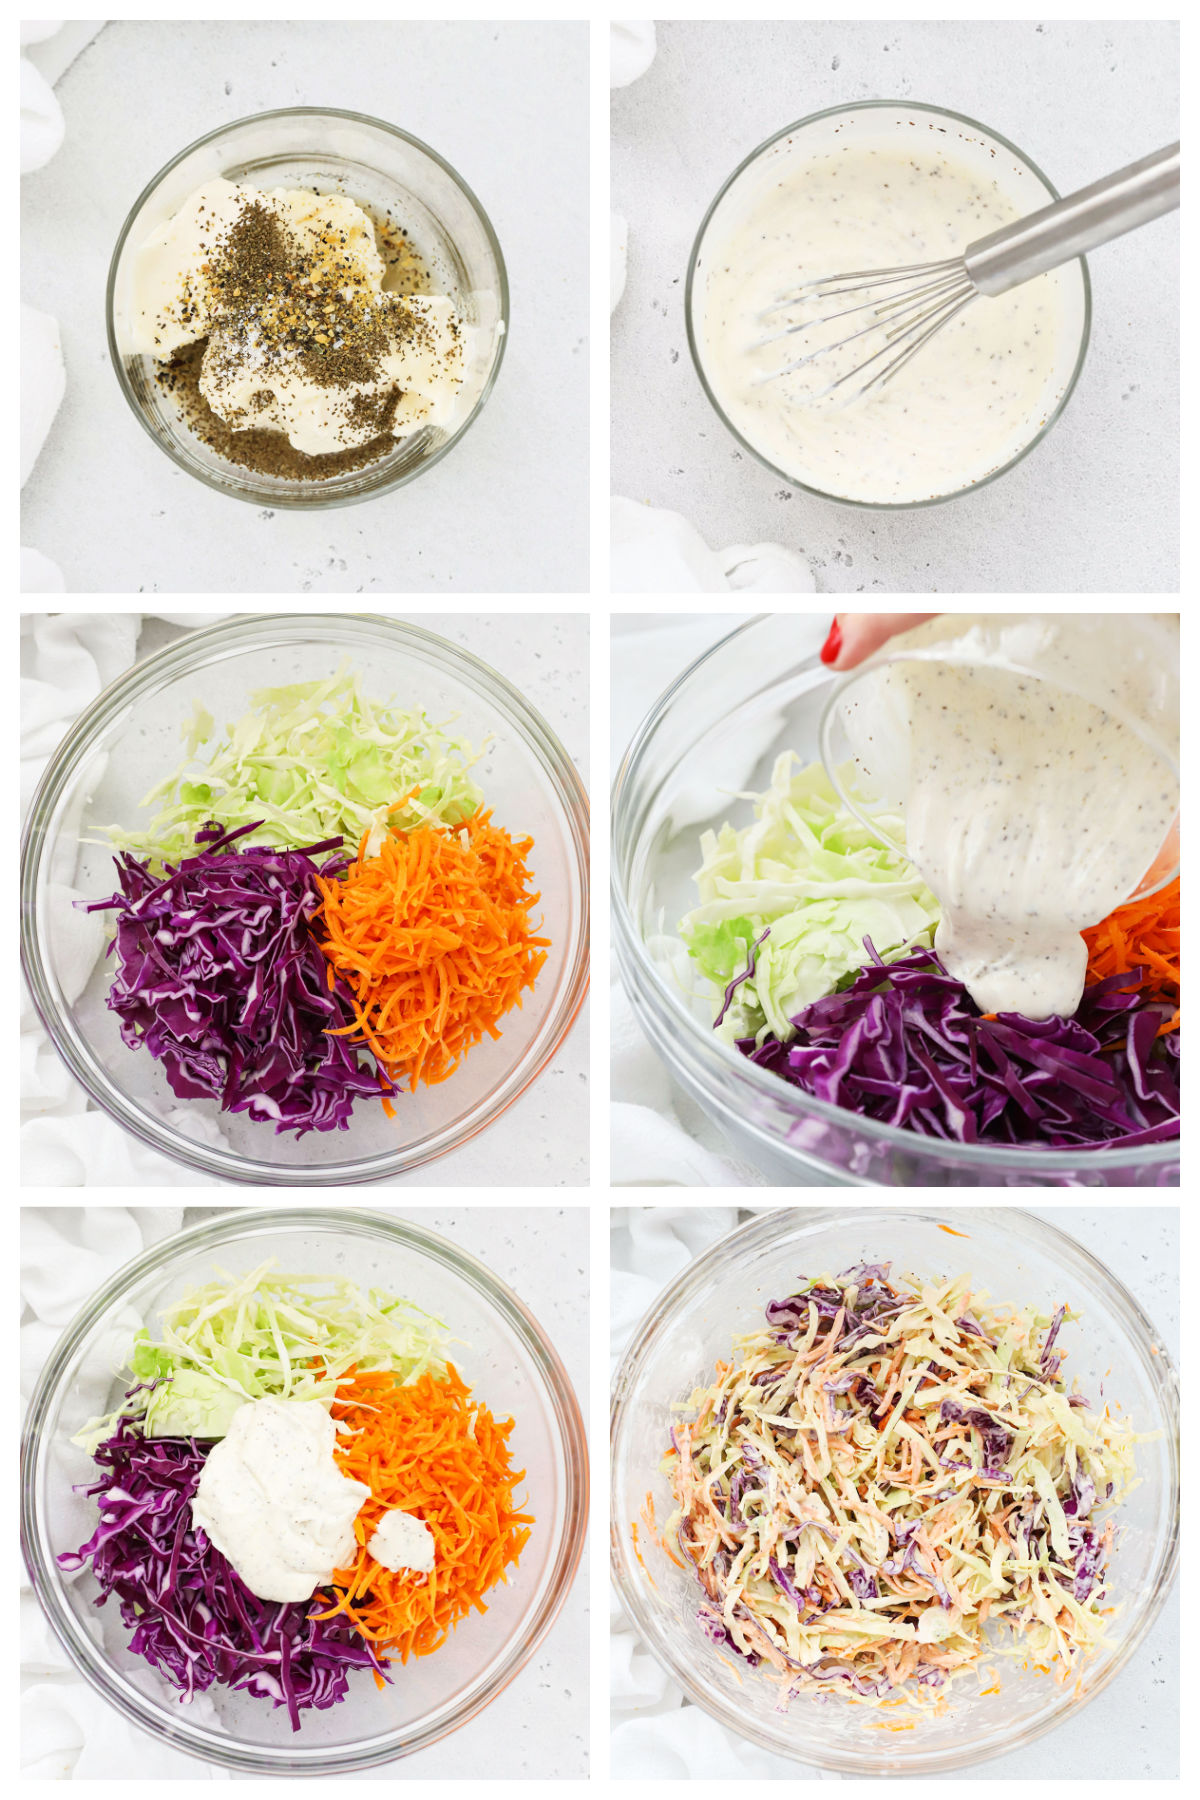 making gluten-free coleslaw step by step